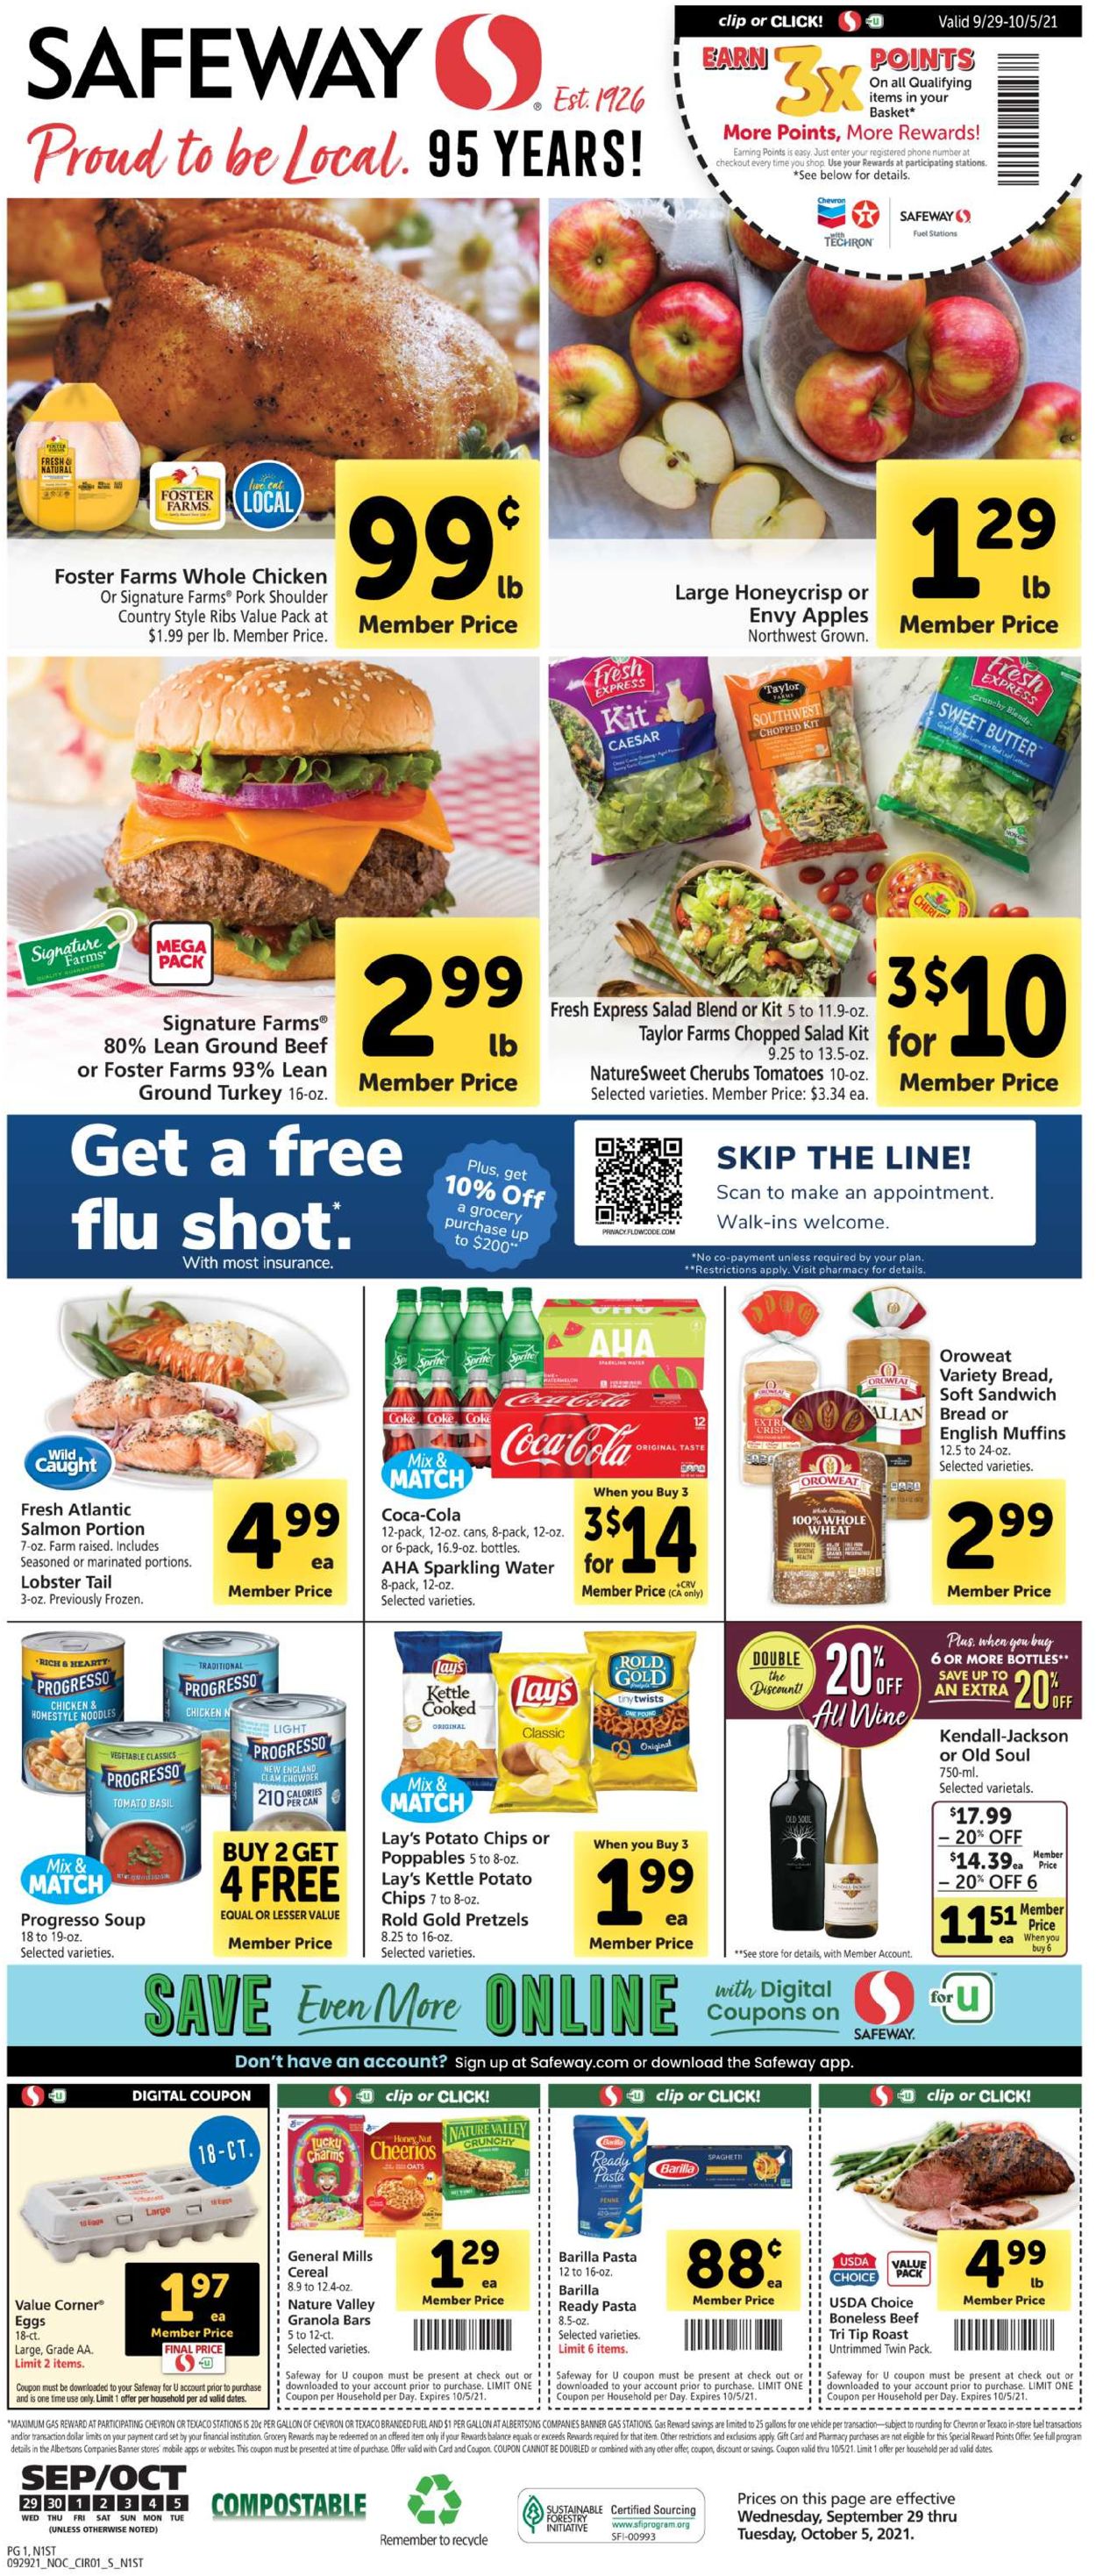 Safeway Current weekly ad 09/29 - 10/05/2021 - frequent-ads.com